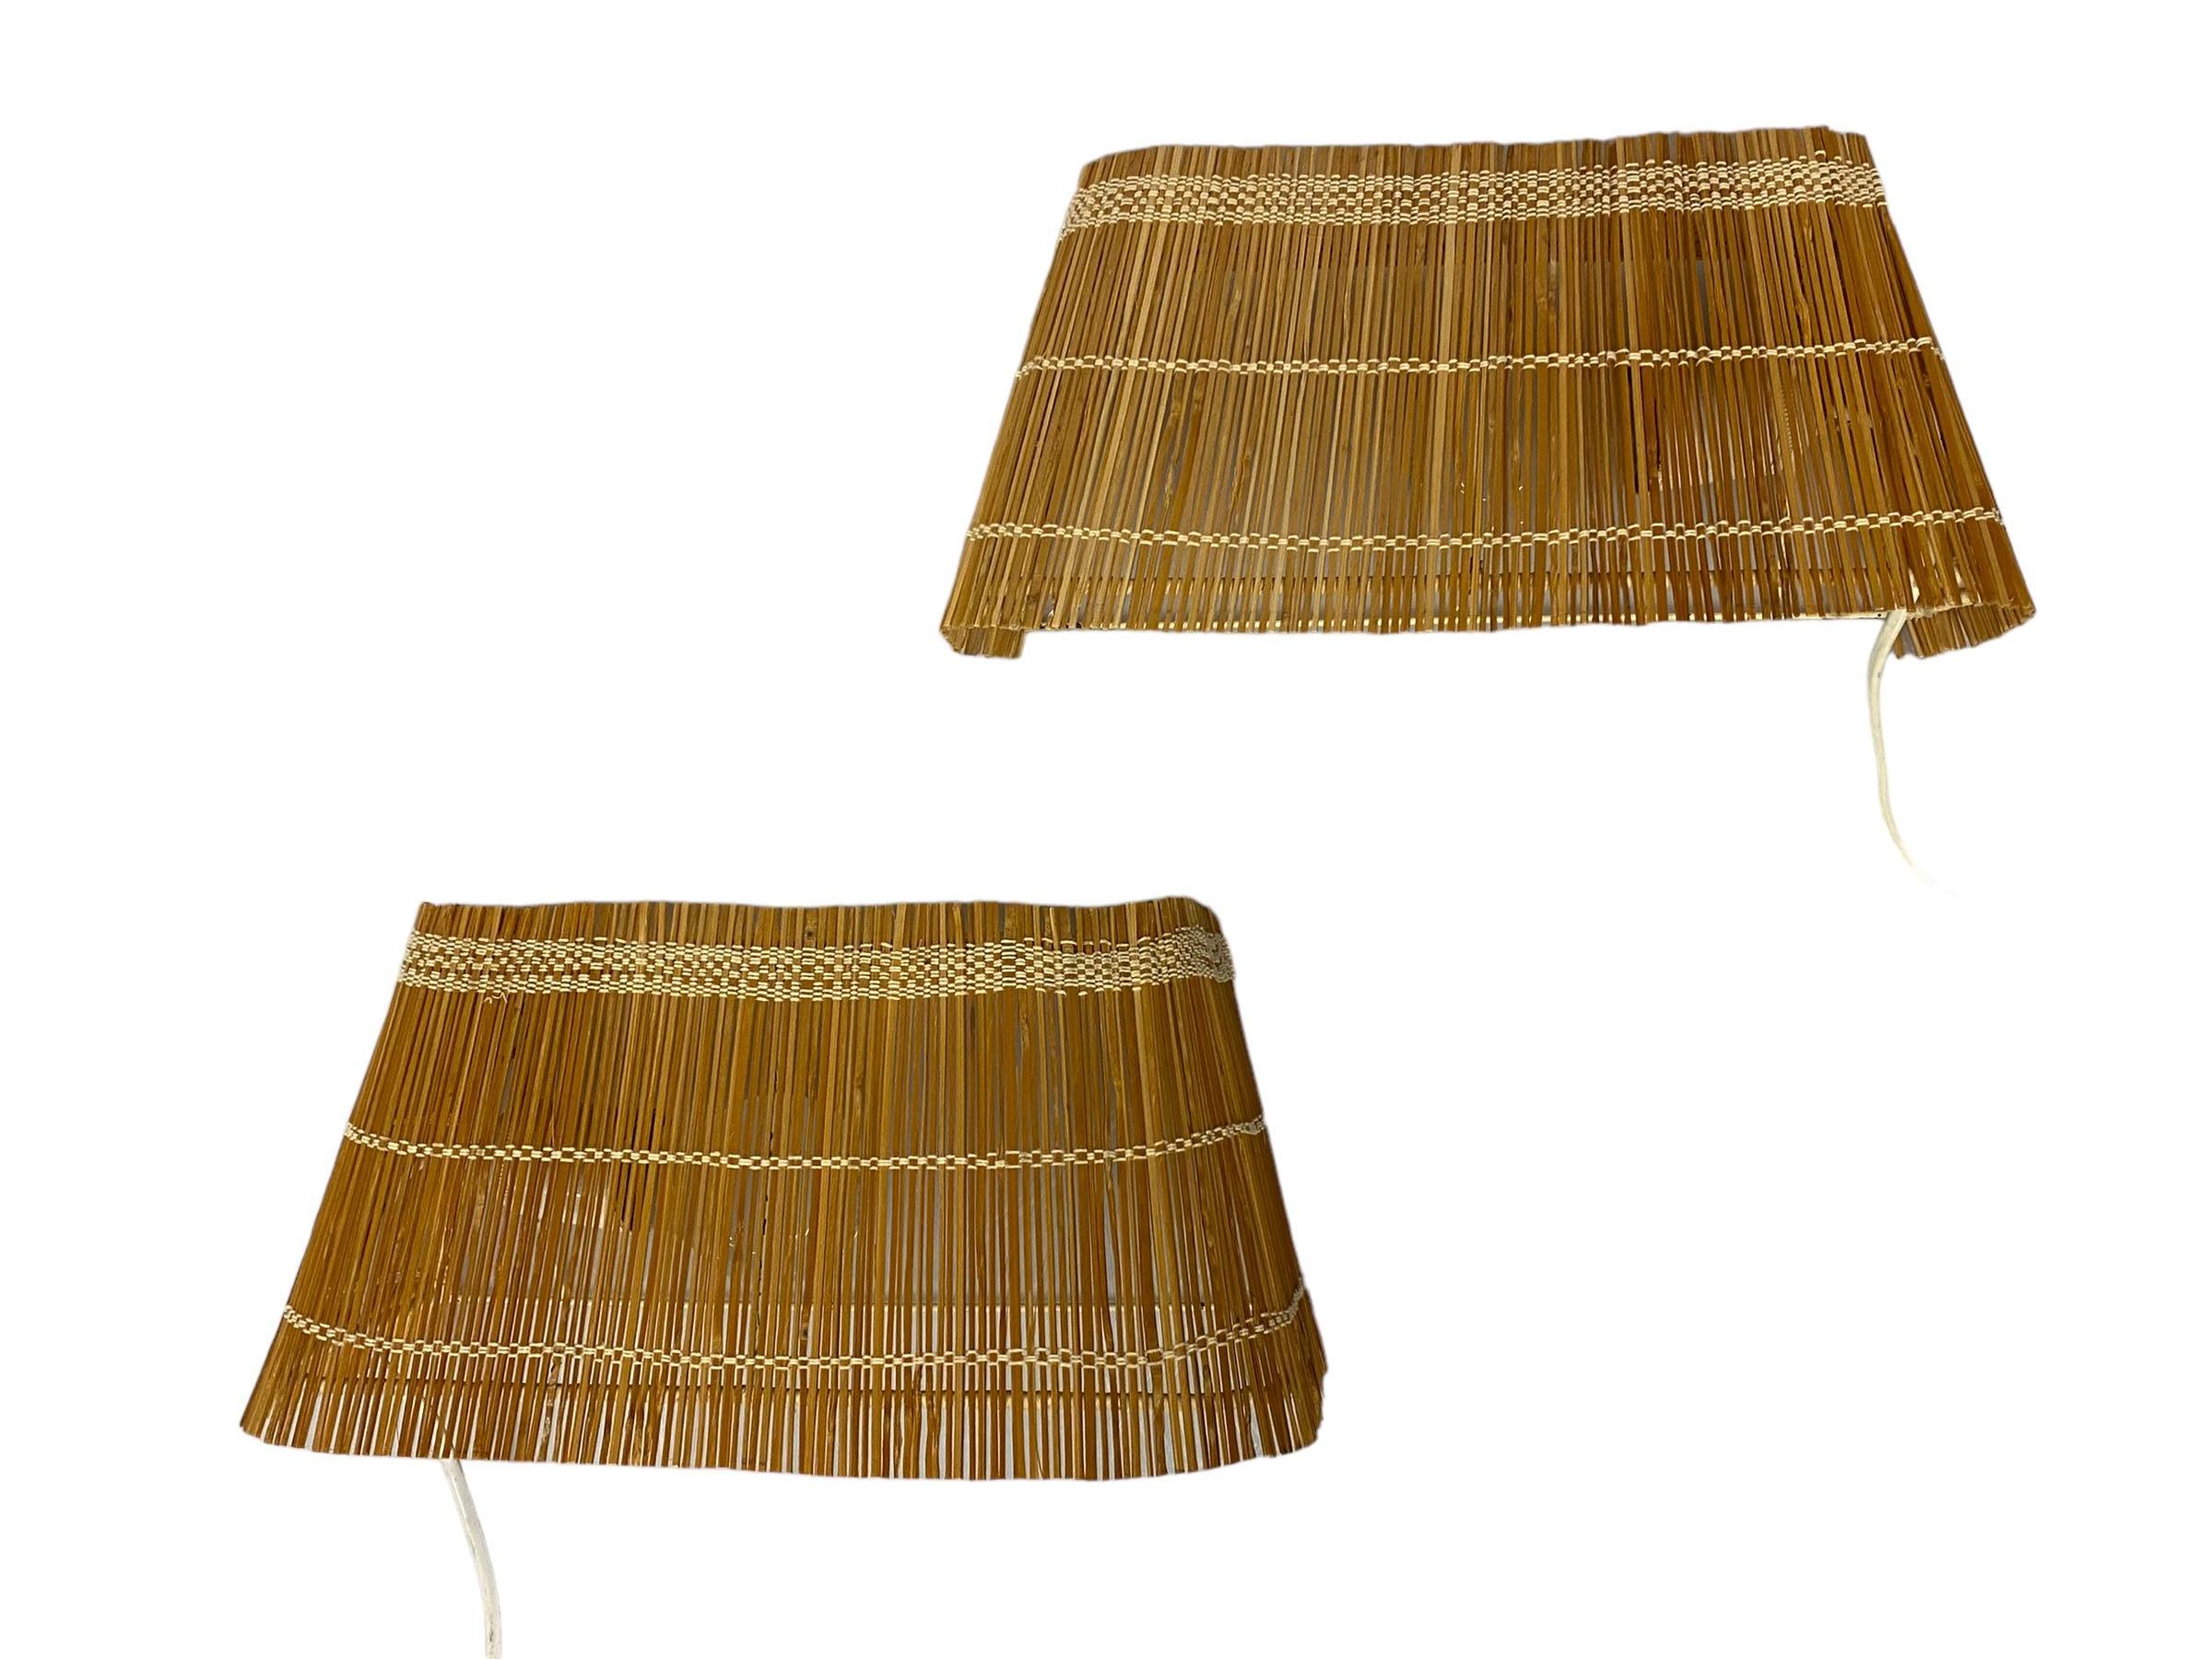 This type wall lamps was made by almost all lamp manufacturers in the 1920-1960s including Taito, Idman, Itsu and Orno. When the light filters through the rattan shades the lamps have a very warm look that's very appealing to people. 

Unfortunately